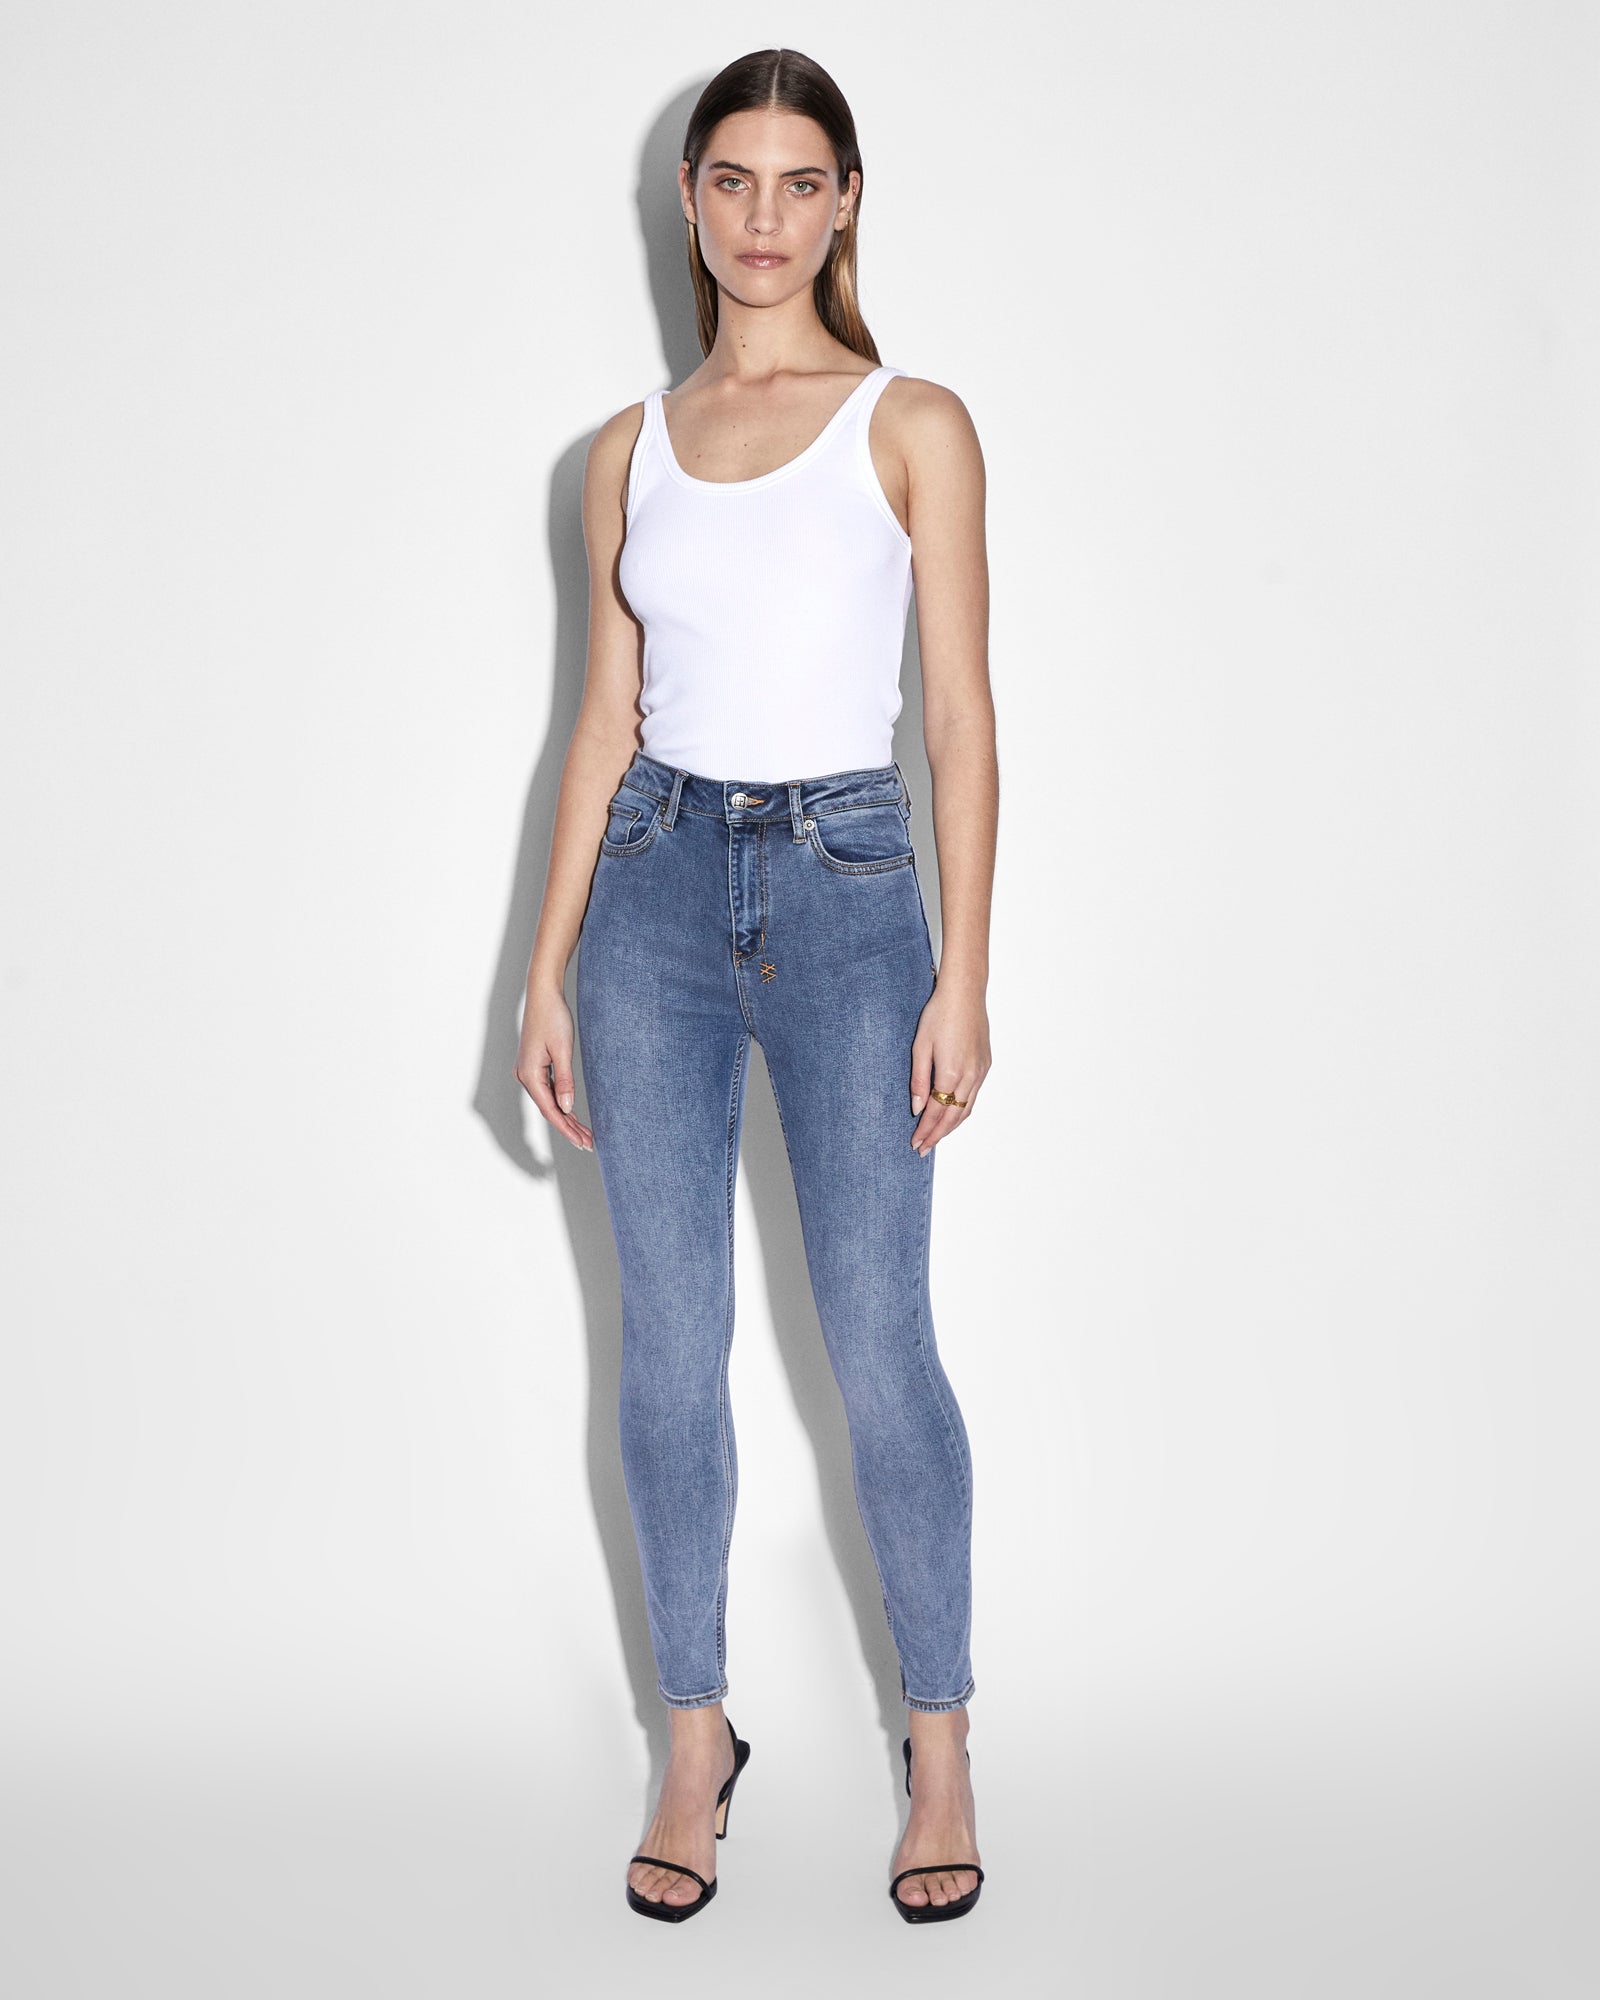 Skinny Jeans & Tight Jeans For Women